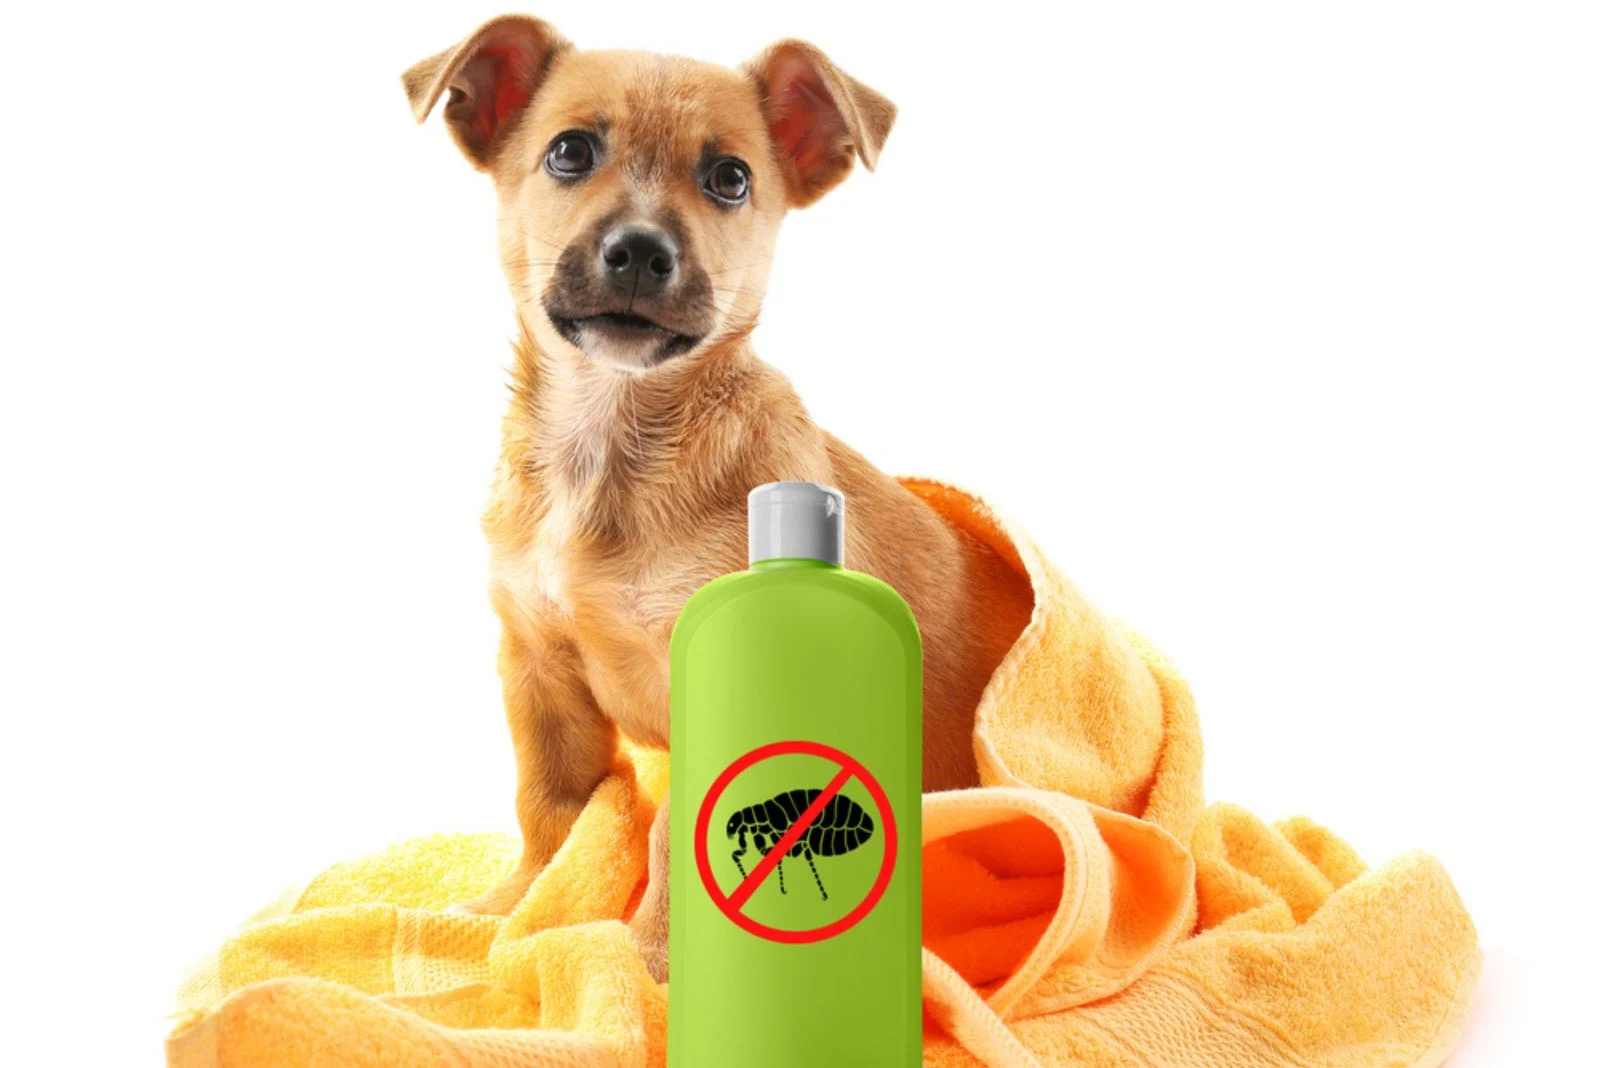 Puppy with towel and bottle of flea shampoo